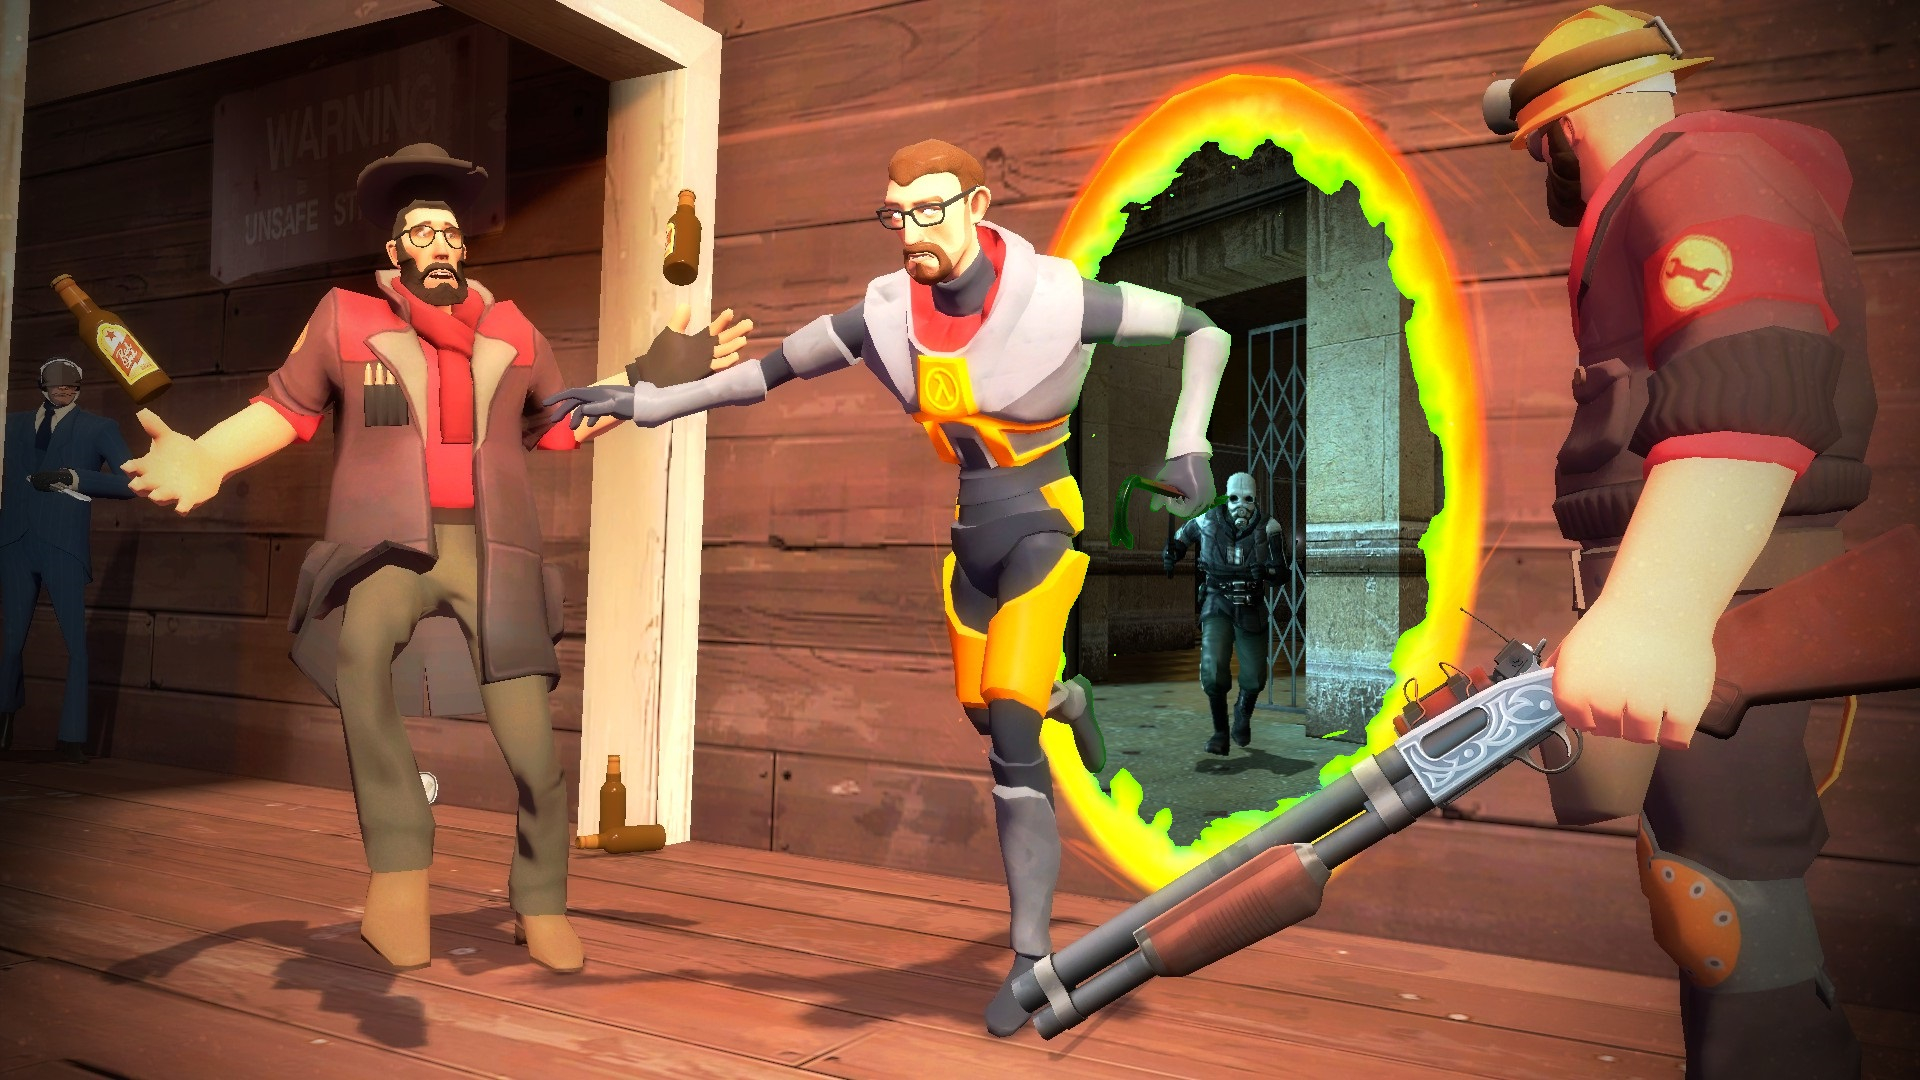      :   64 , Team Fortress 2  ,       